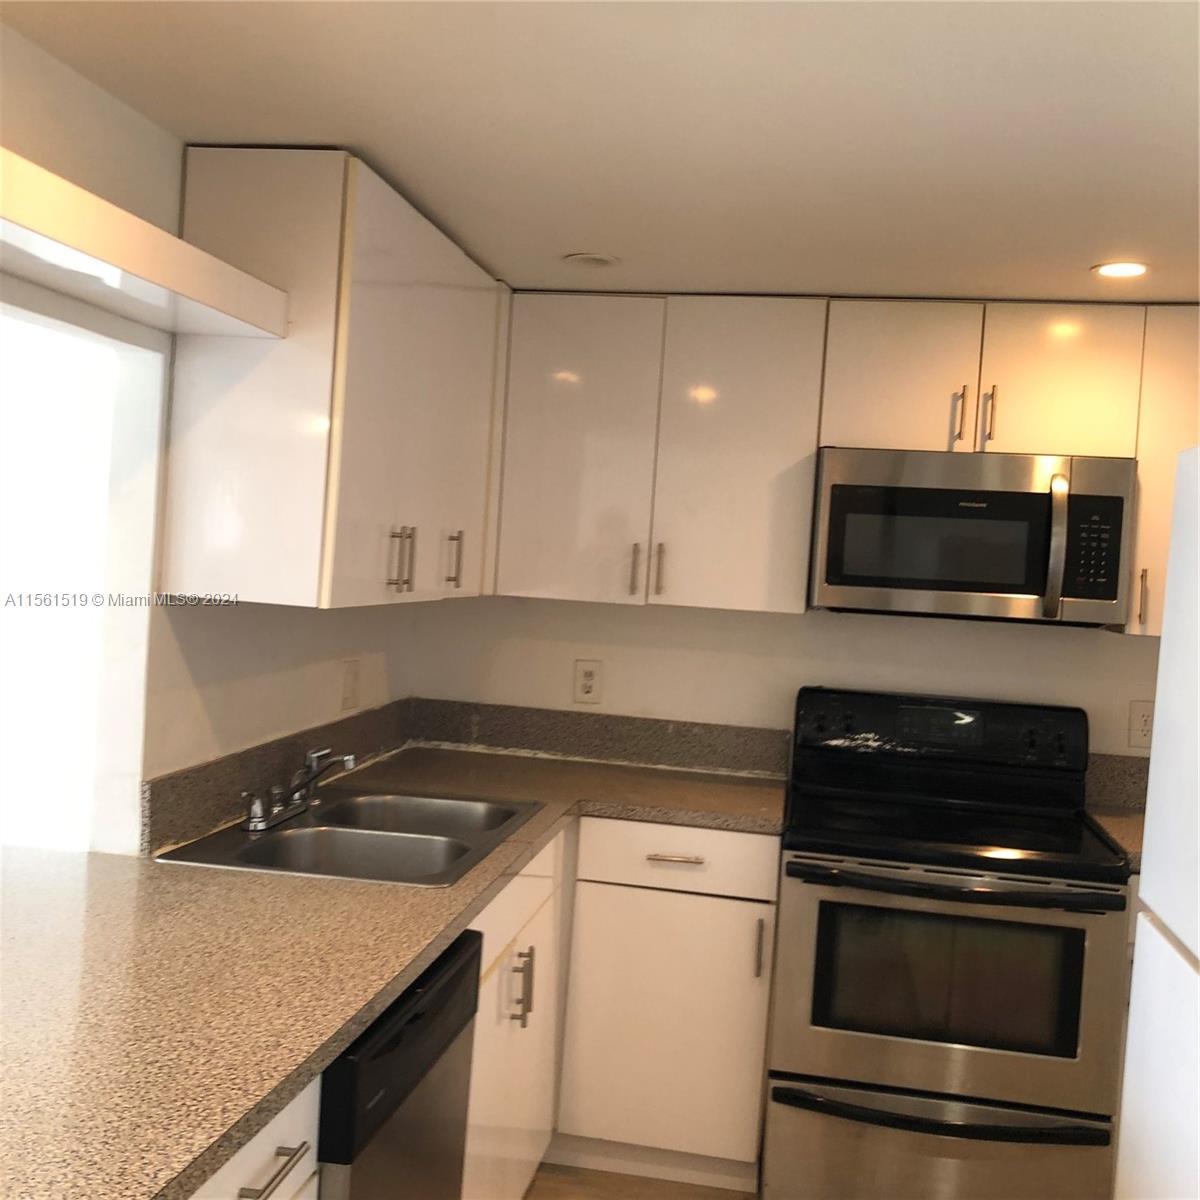 Photo of 15600 NW 7th Ave #803 in Miami, FL